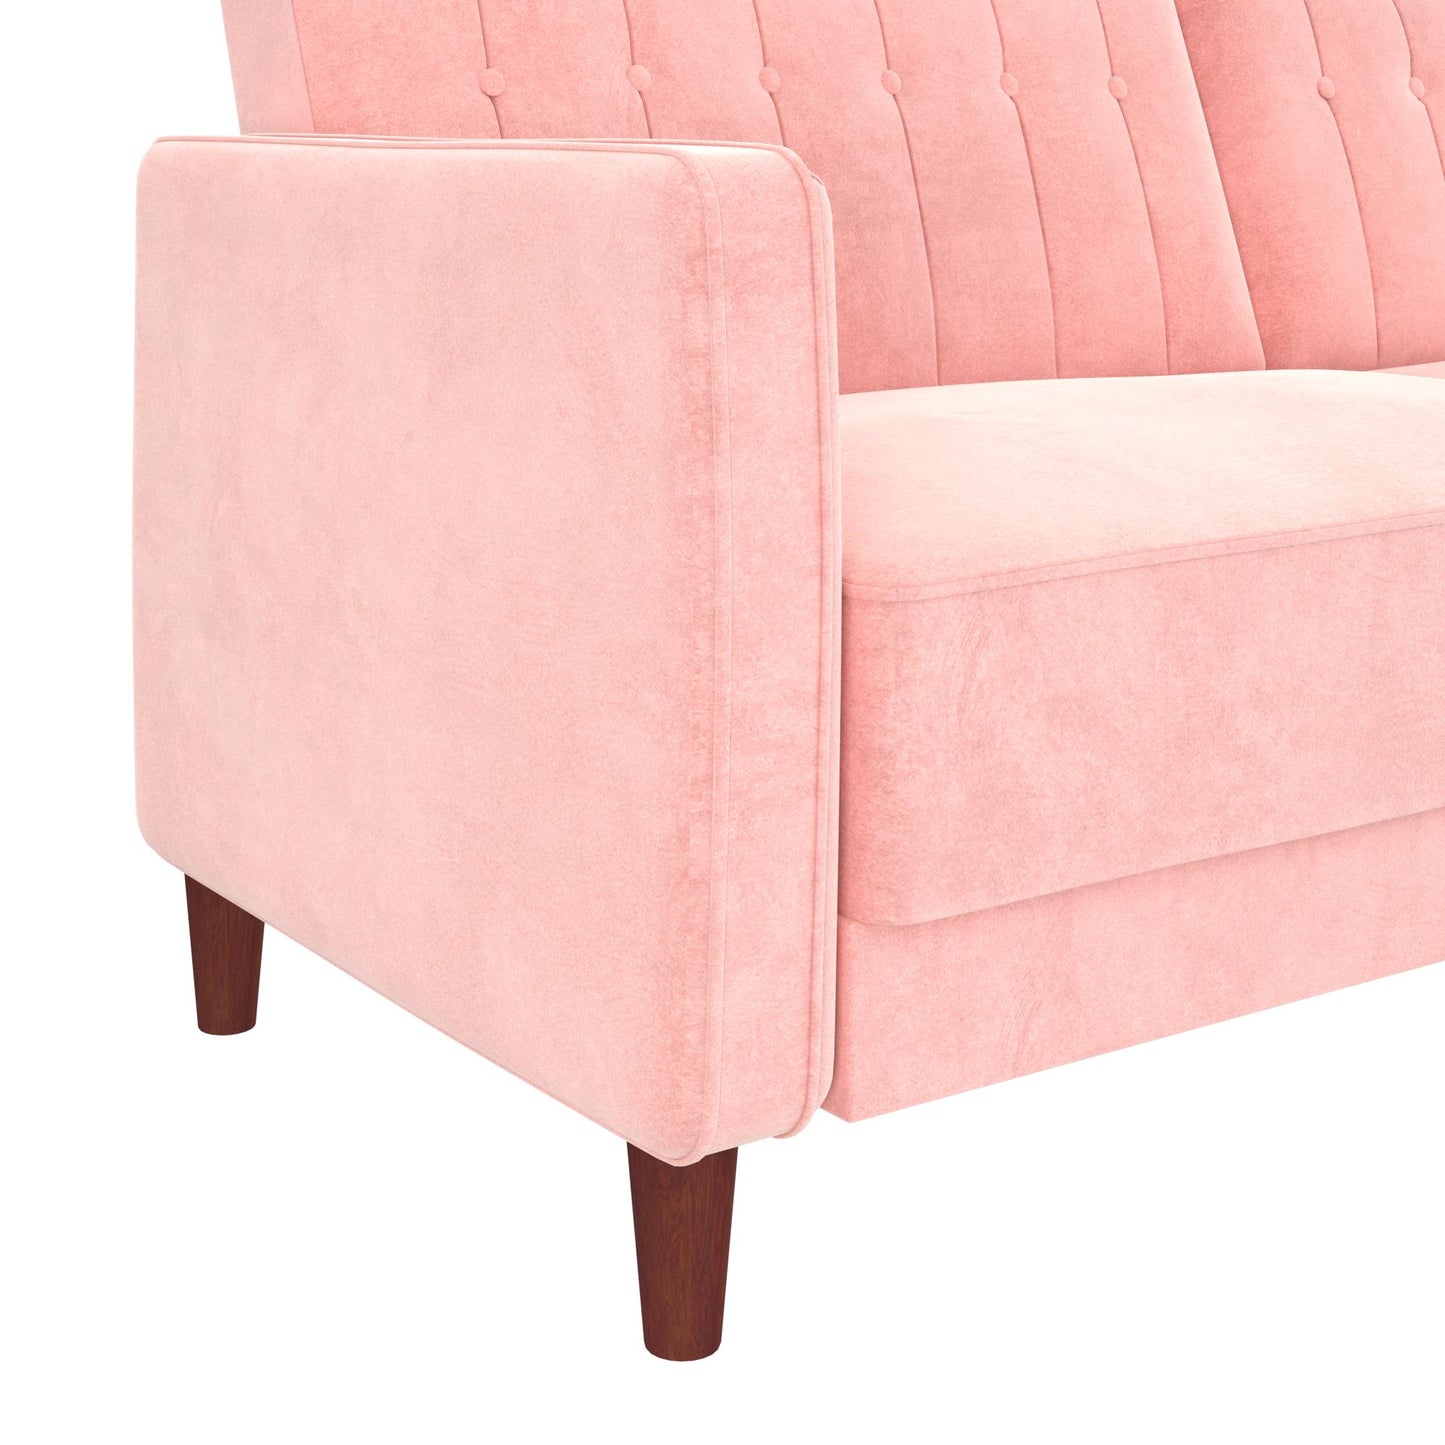 Pin Tufted Transitional Futon with Vertical Stitching and Button Tufting - Pink